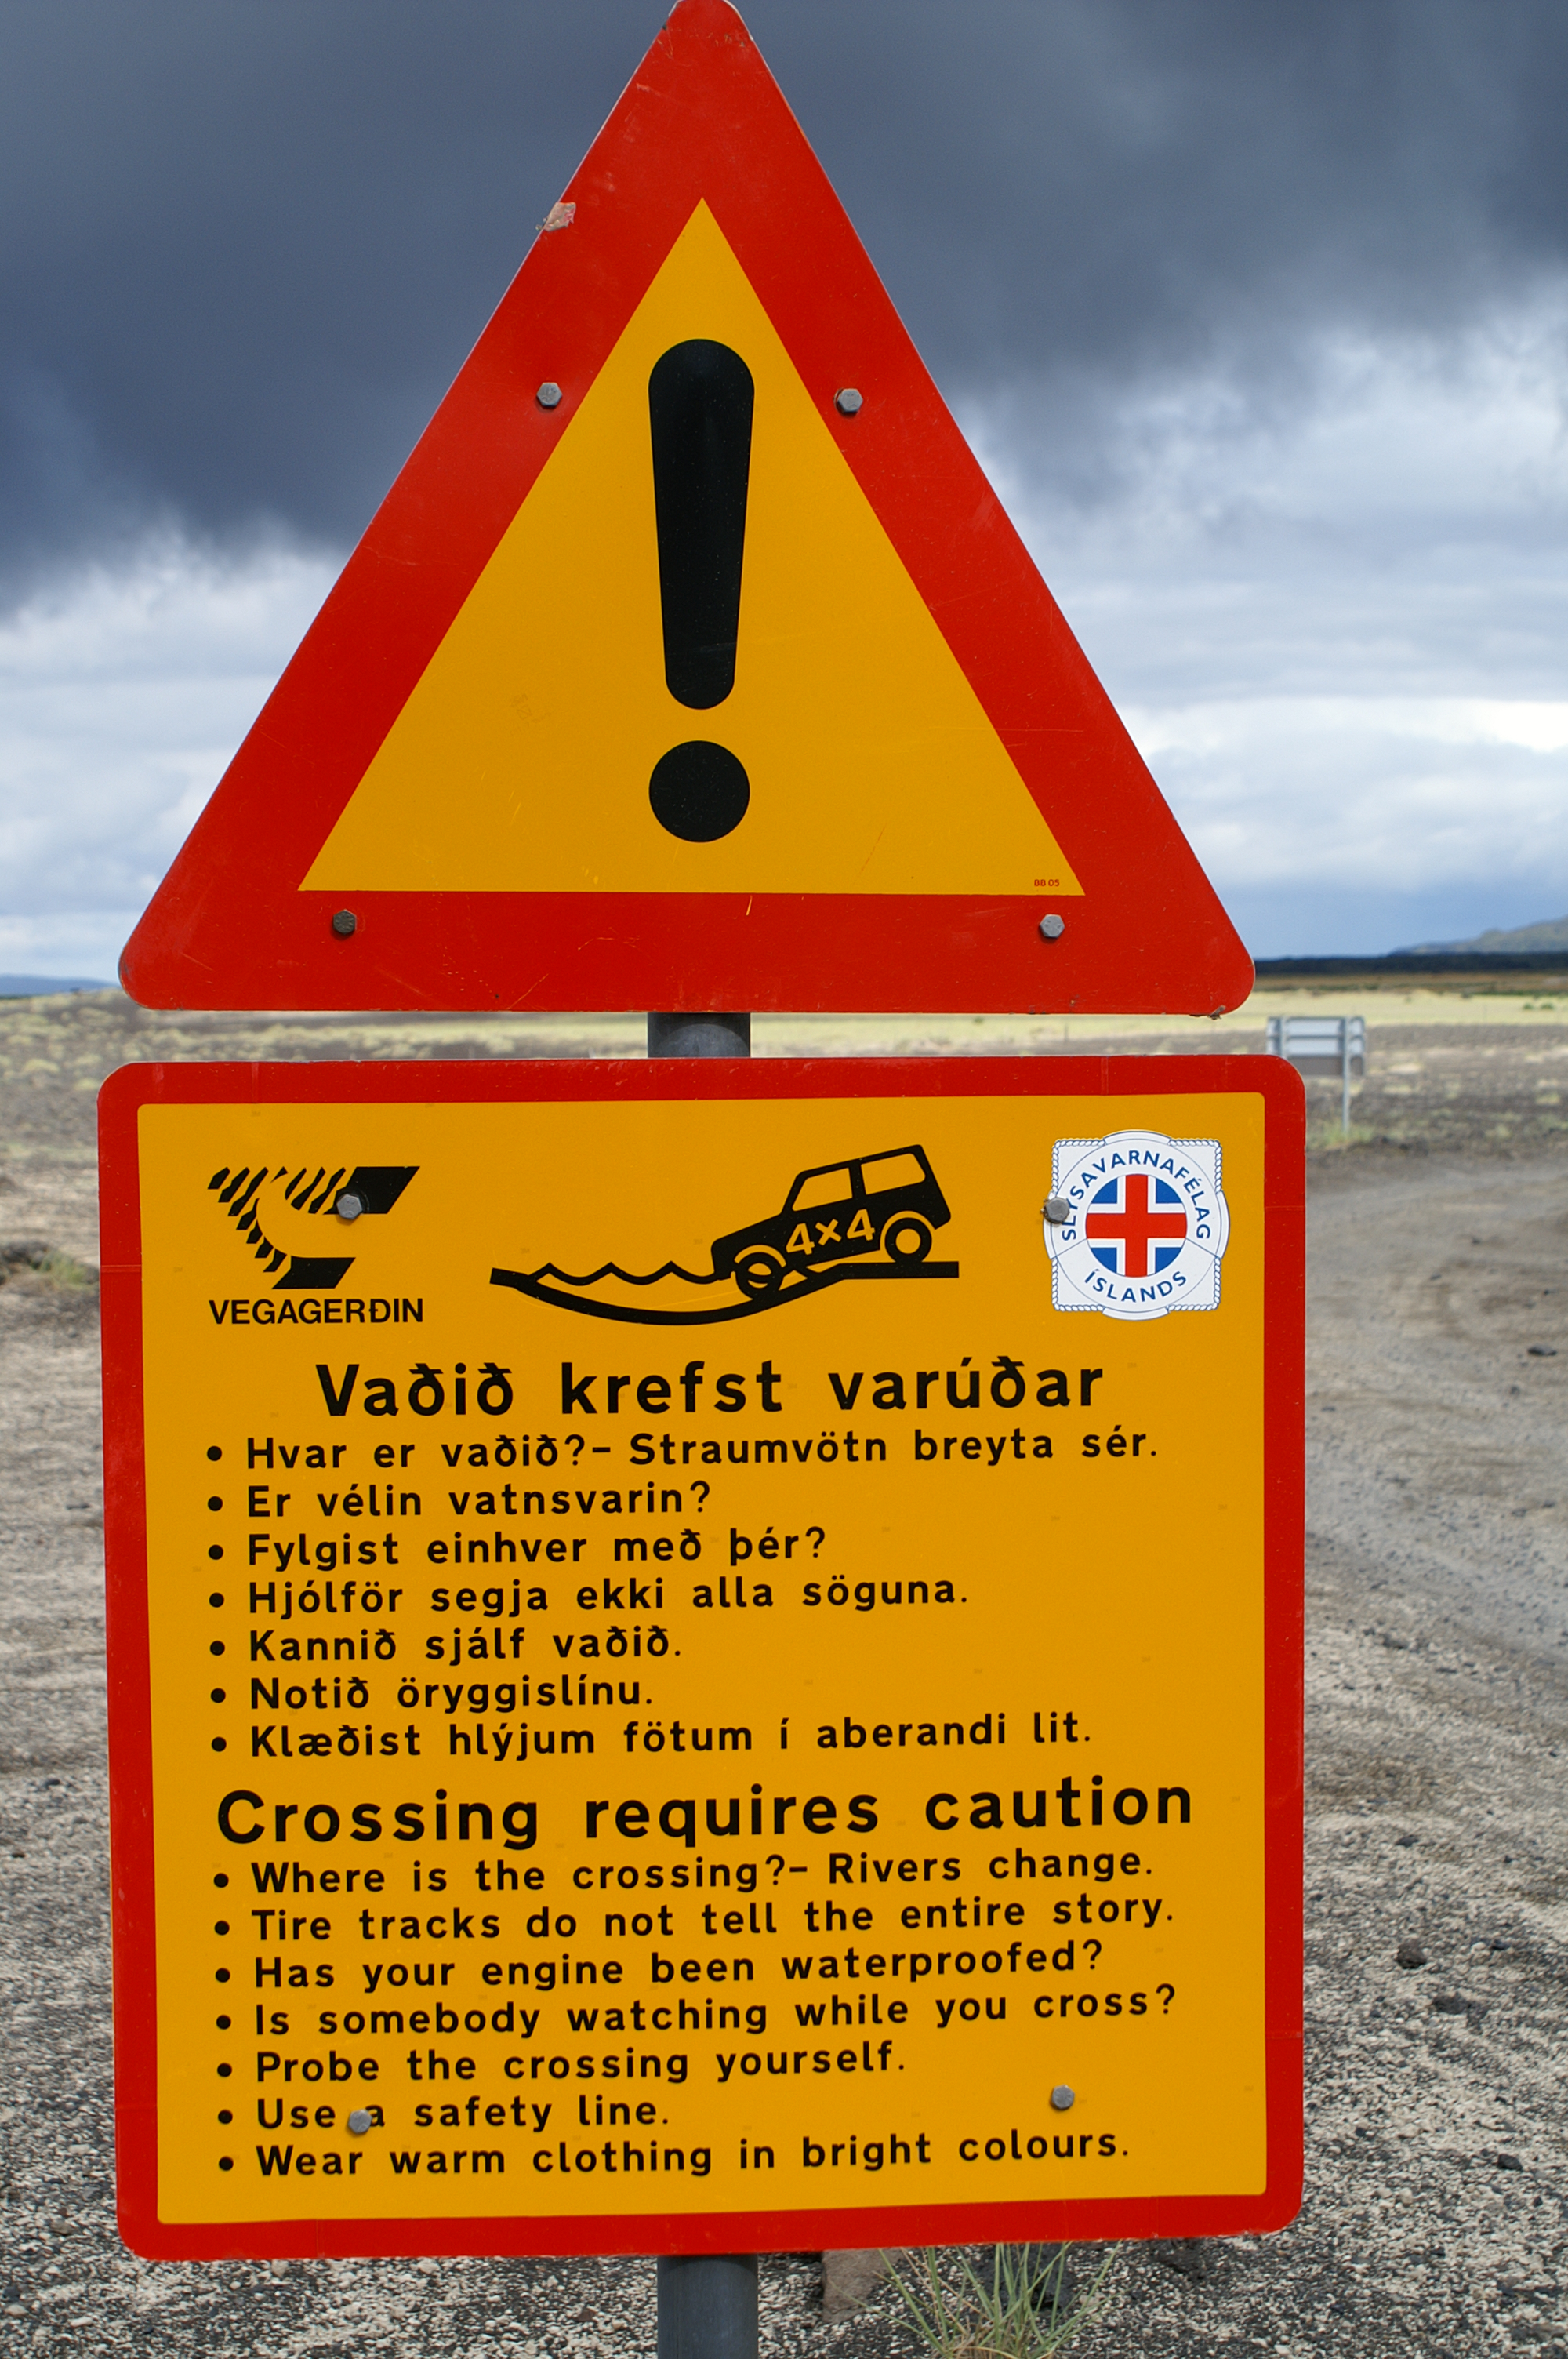 File Road Signs In Iceland 07 Jpg Wikimedia Commons